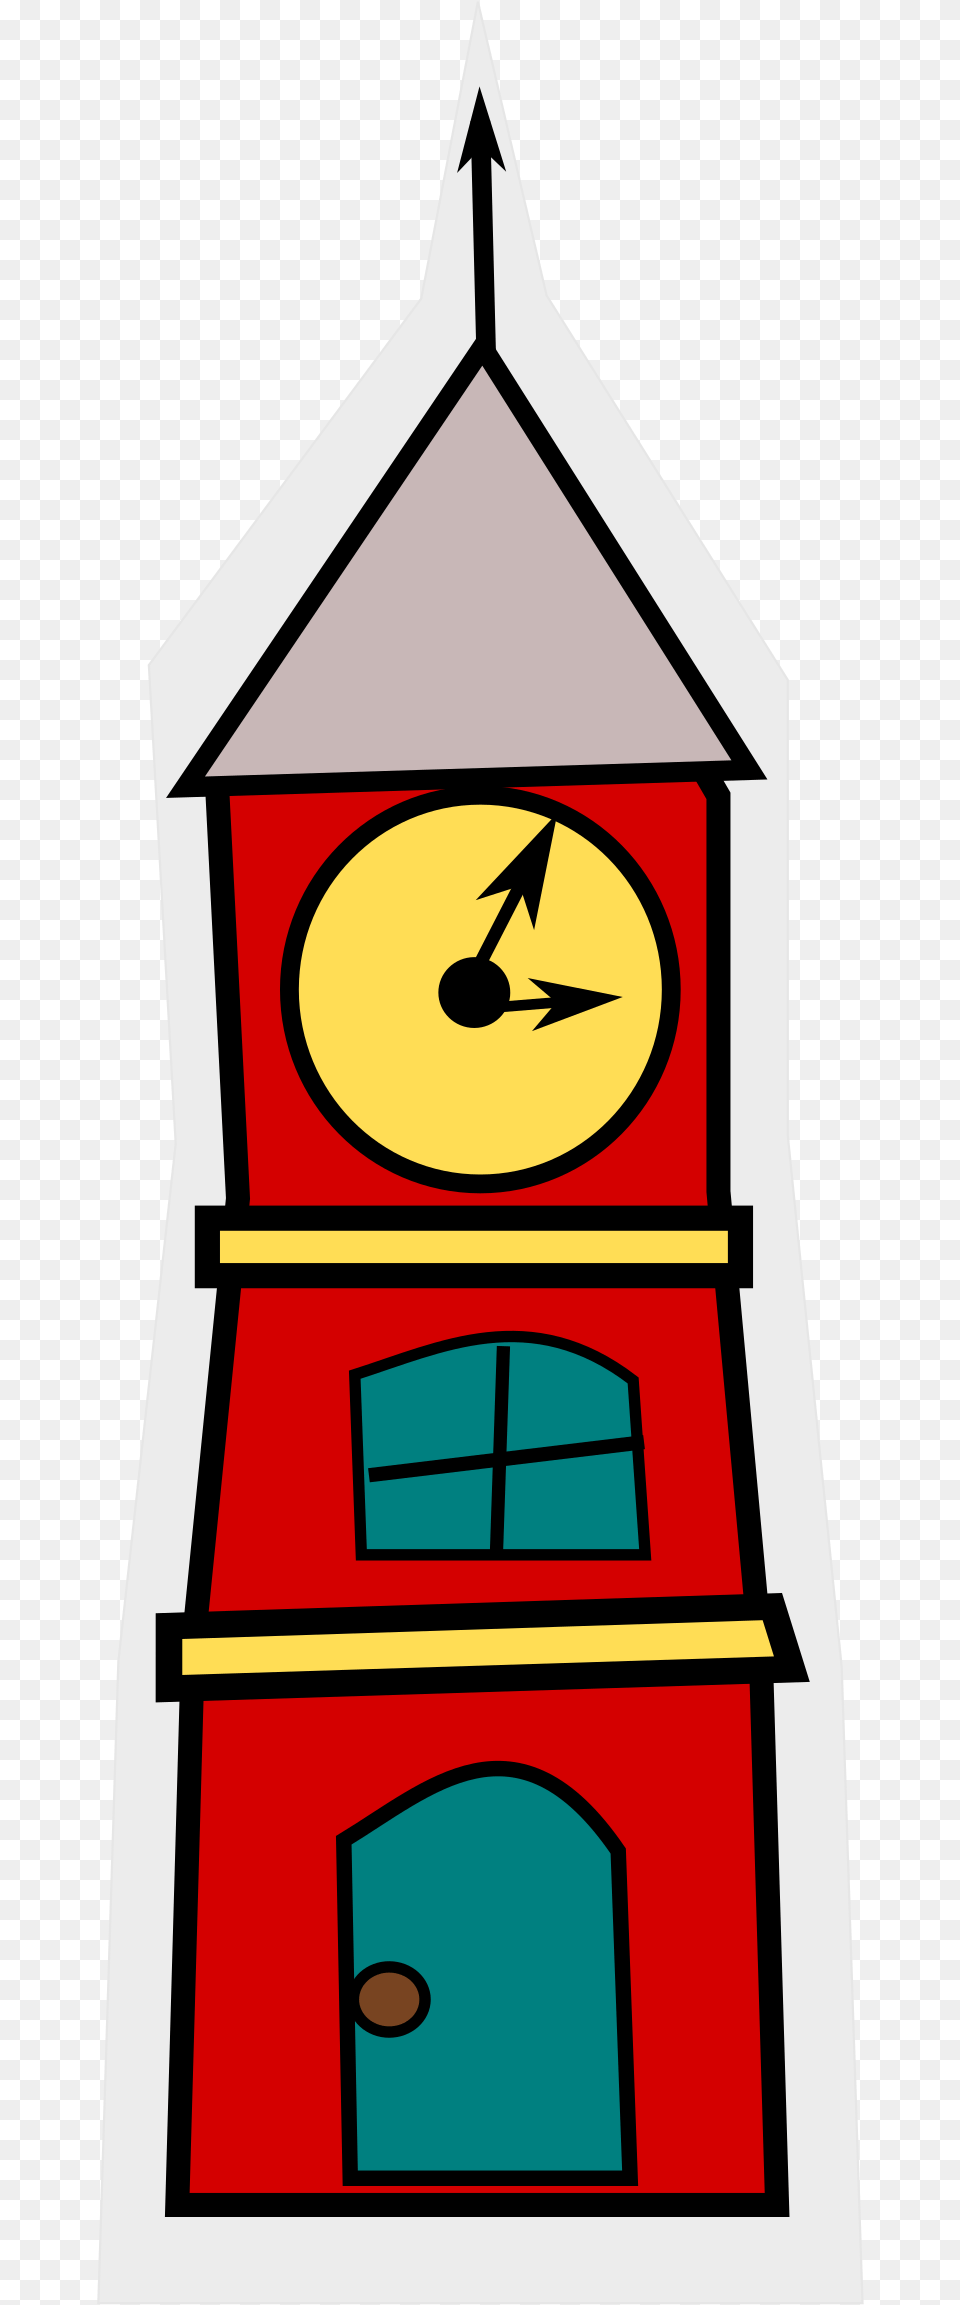 Grandfather Clock Clipart At Getdrawings Clock Tower Clipart, Architecture, Building, Clock Tower, Bell Tower Free Png Download